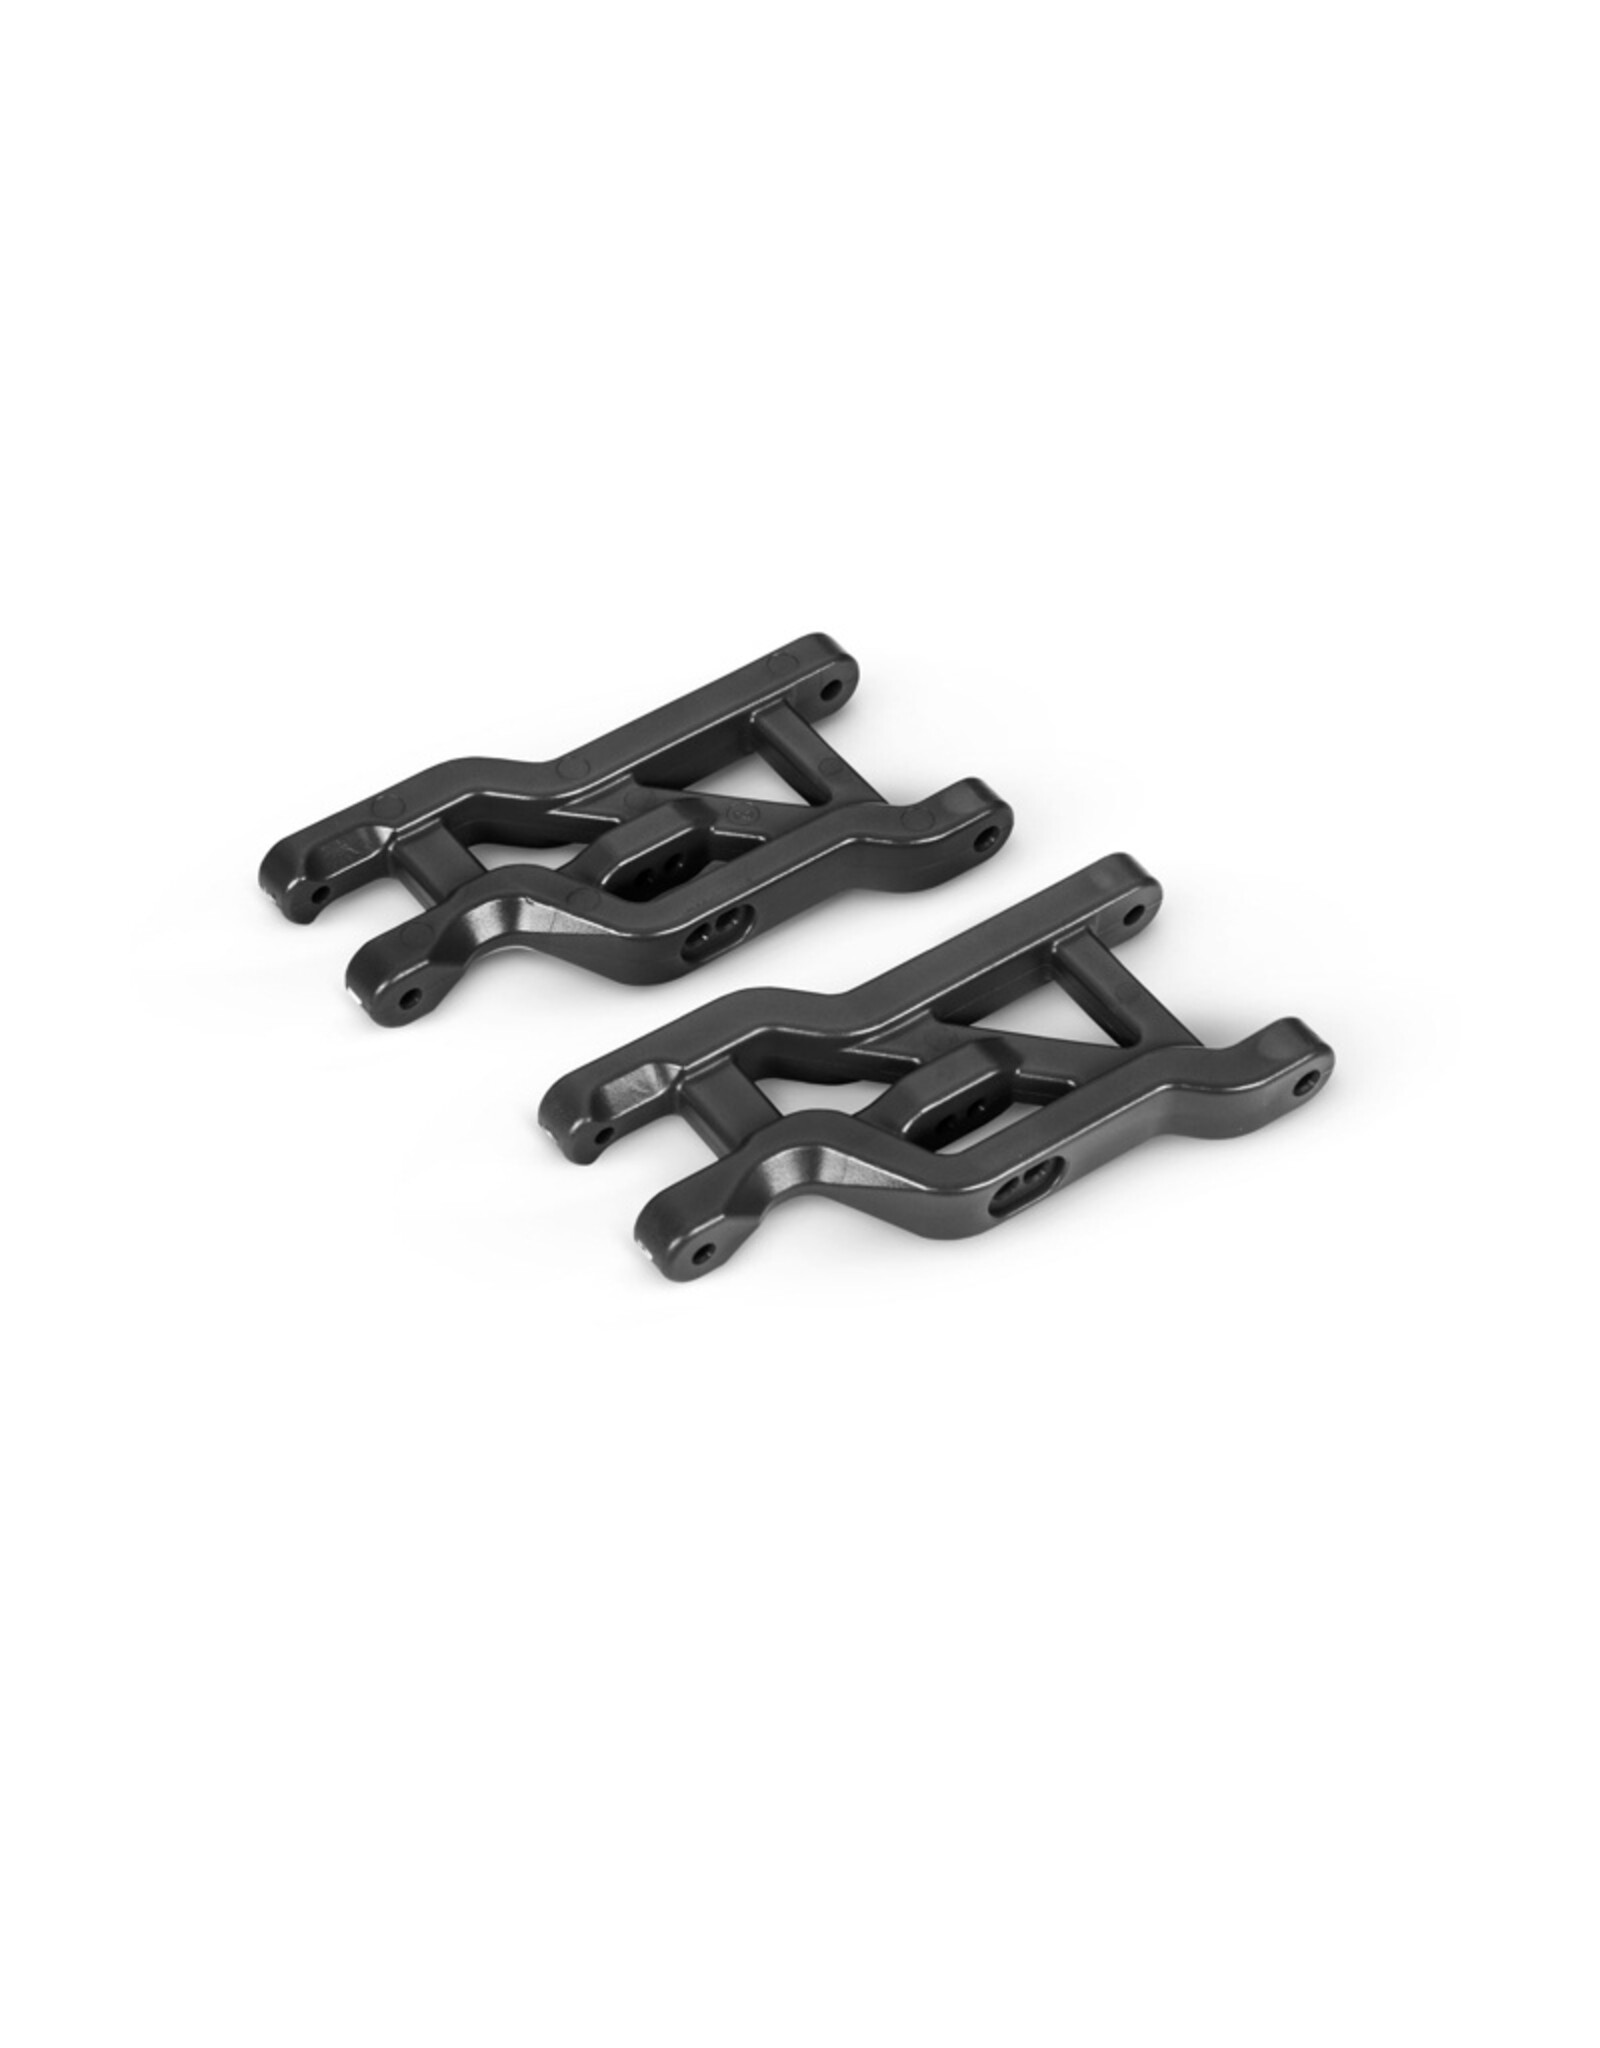 Traxxas TRA2531A Suspension arms, black, front, heavy duty (2)